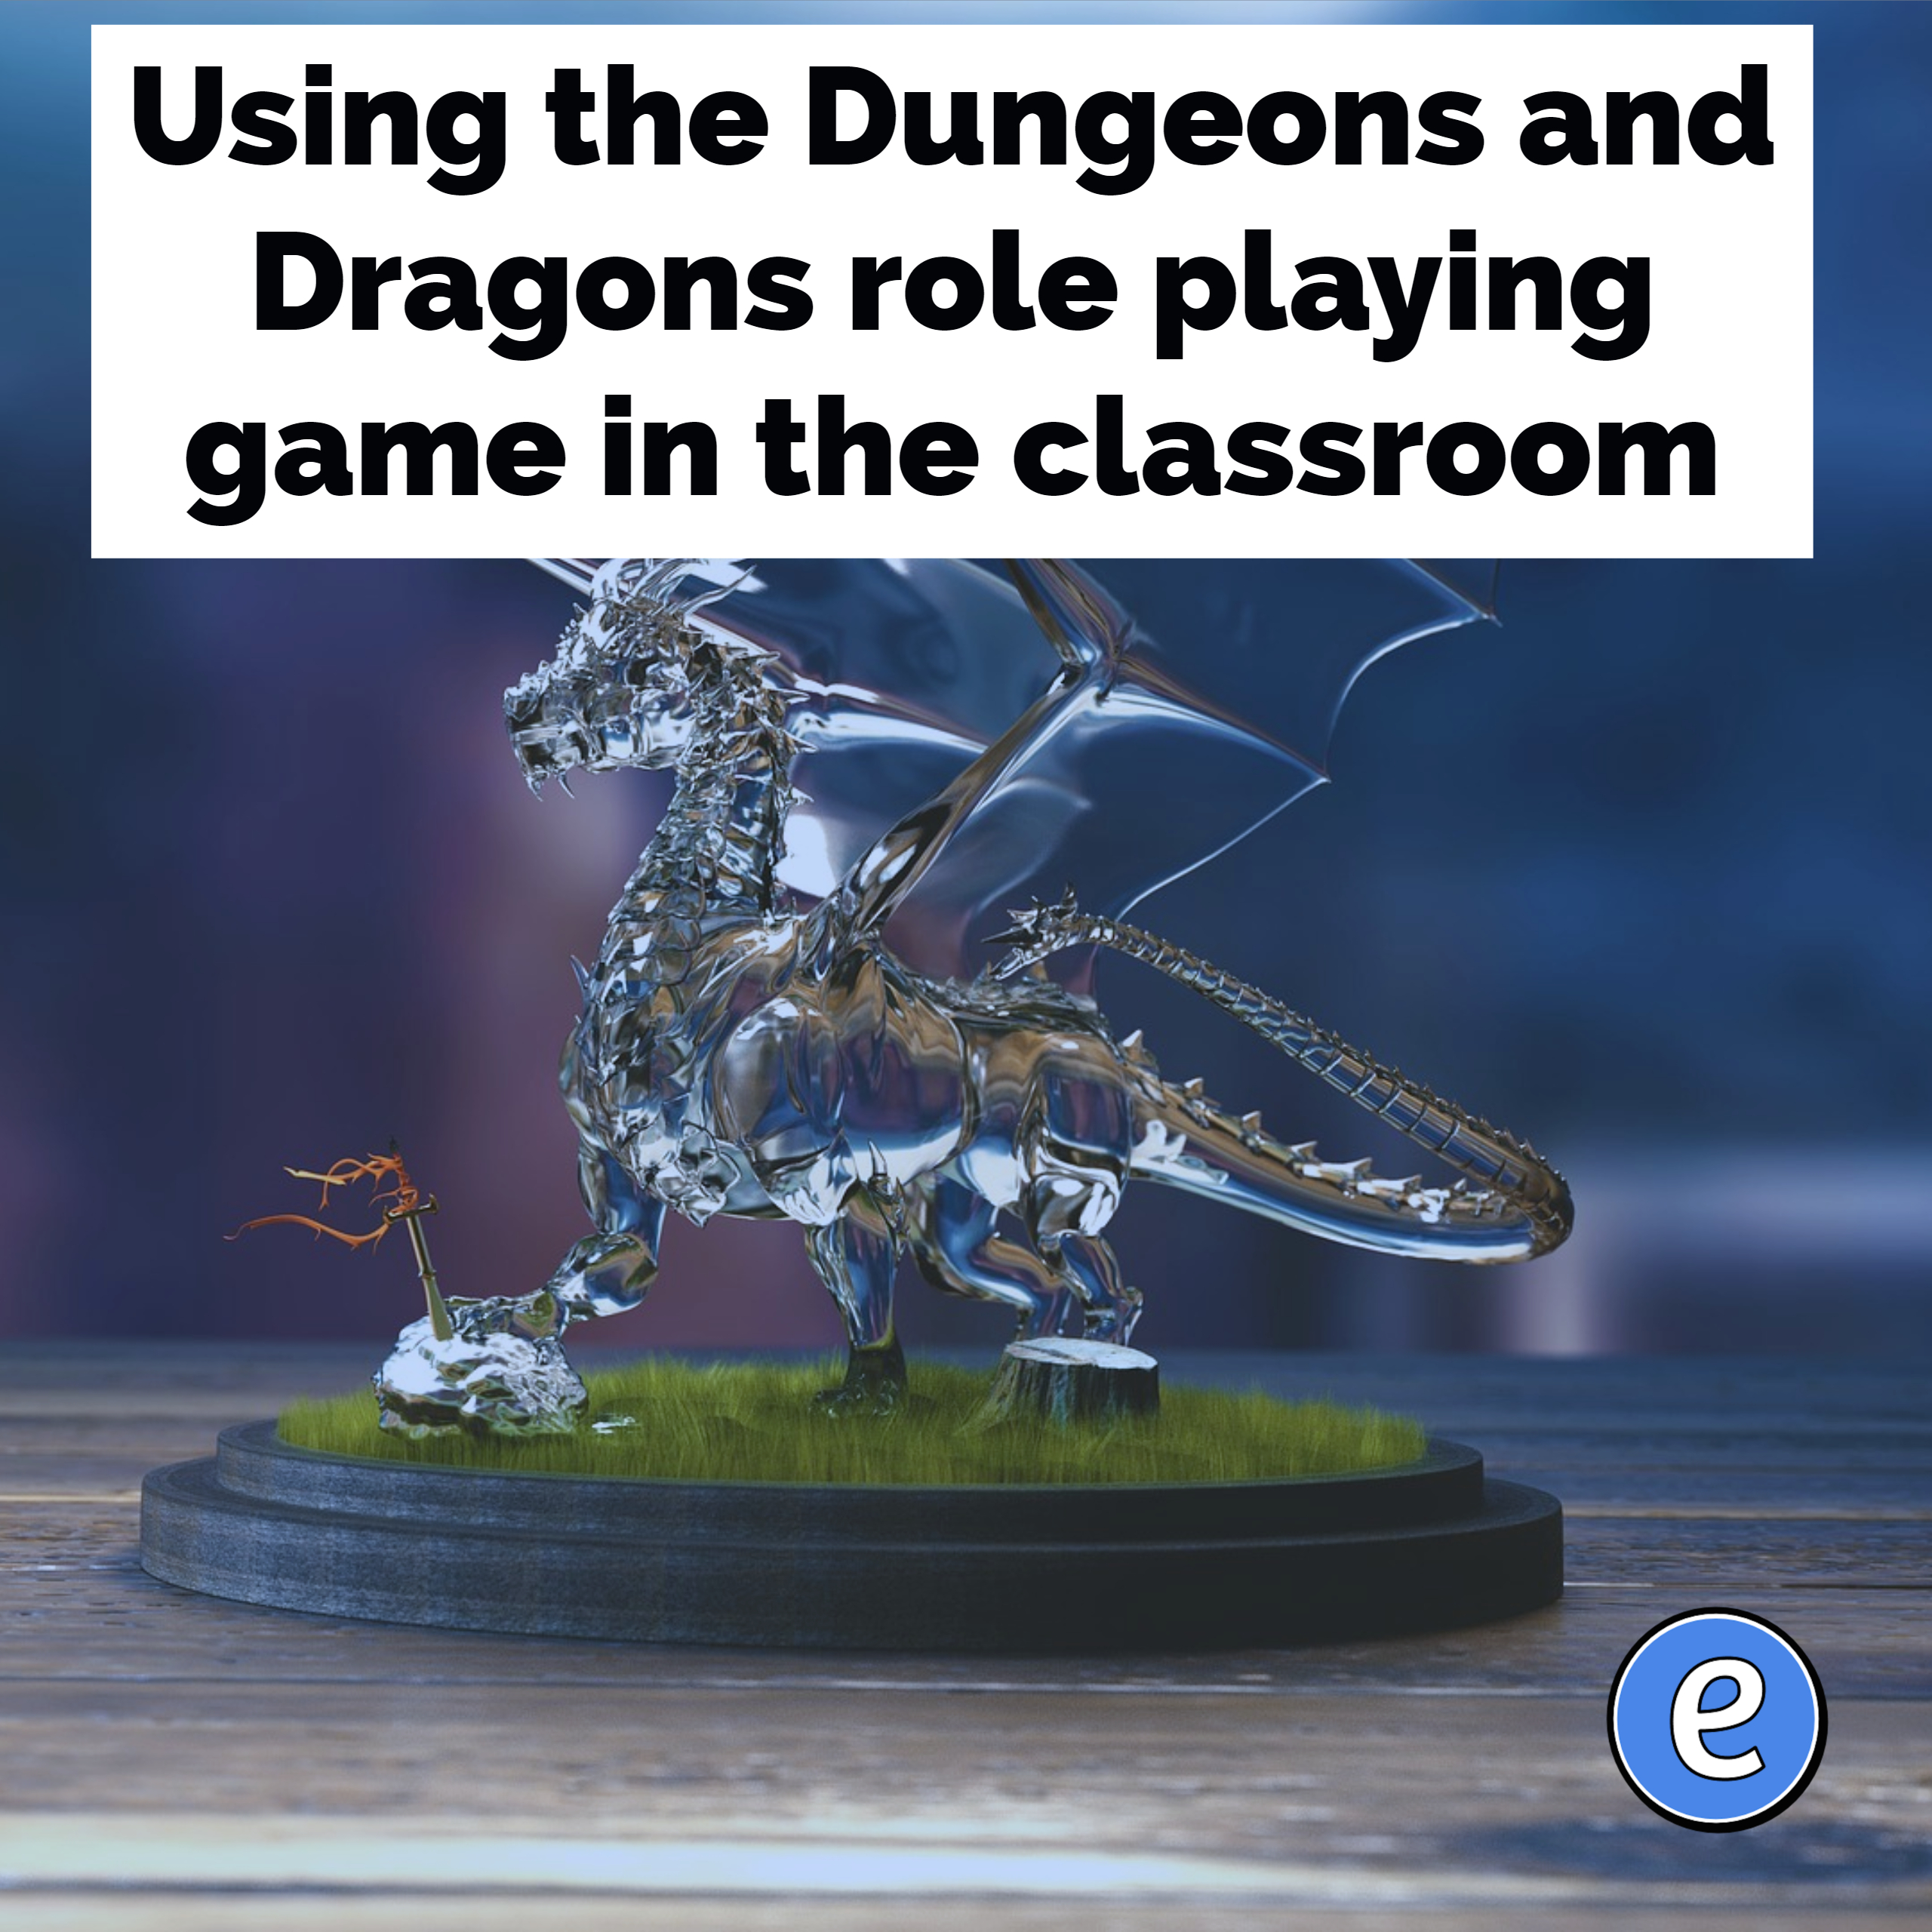 Using the Dungeons and Dragons role playing game in the classroom